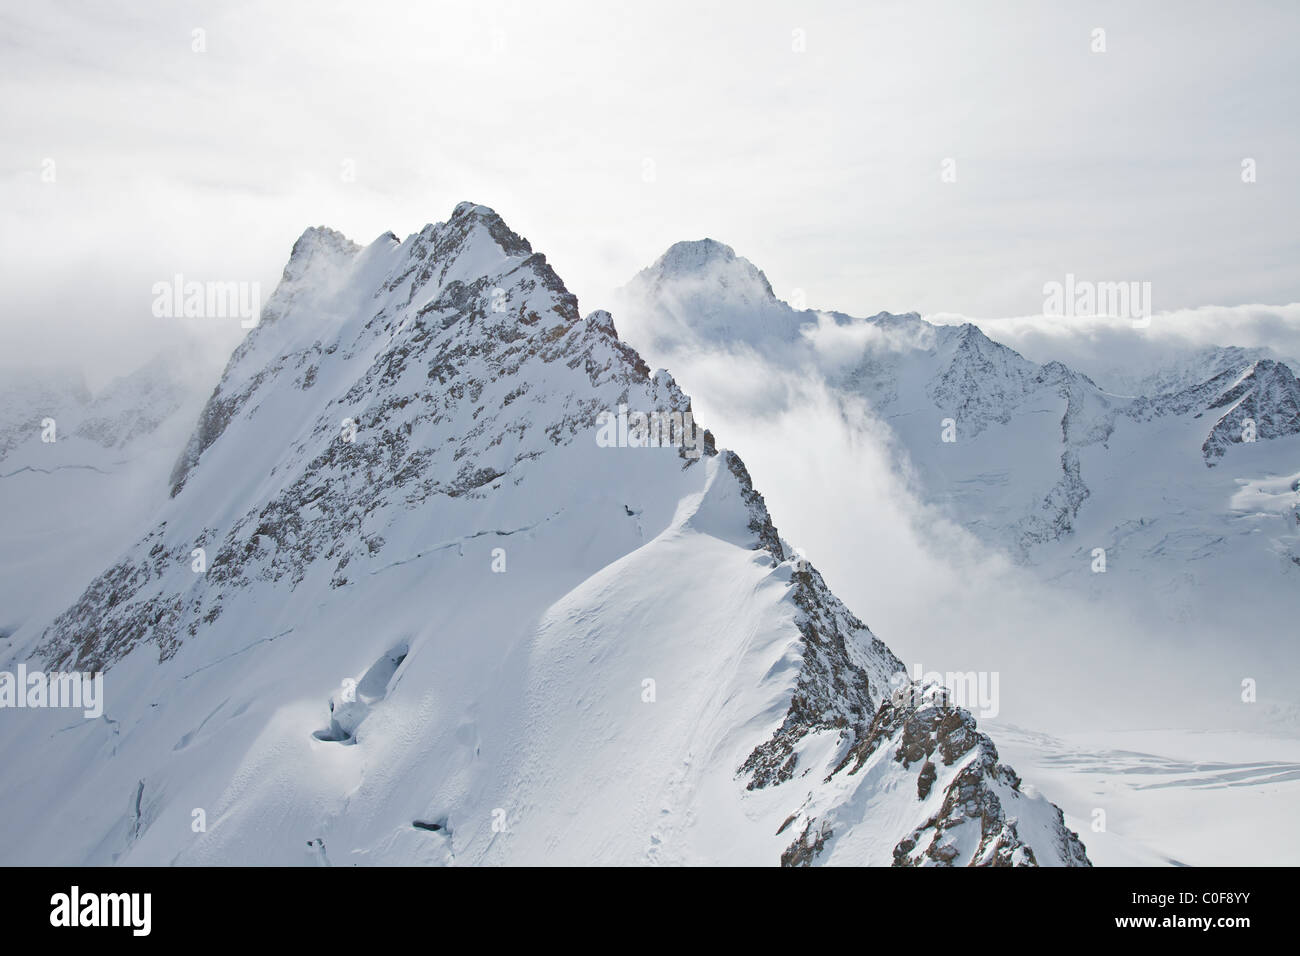 Mountain peaks surrounding the Eiger- Monch-Jungfrau seen from a helicopter Bernese Oberland, Switzerland Stock Photo